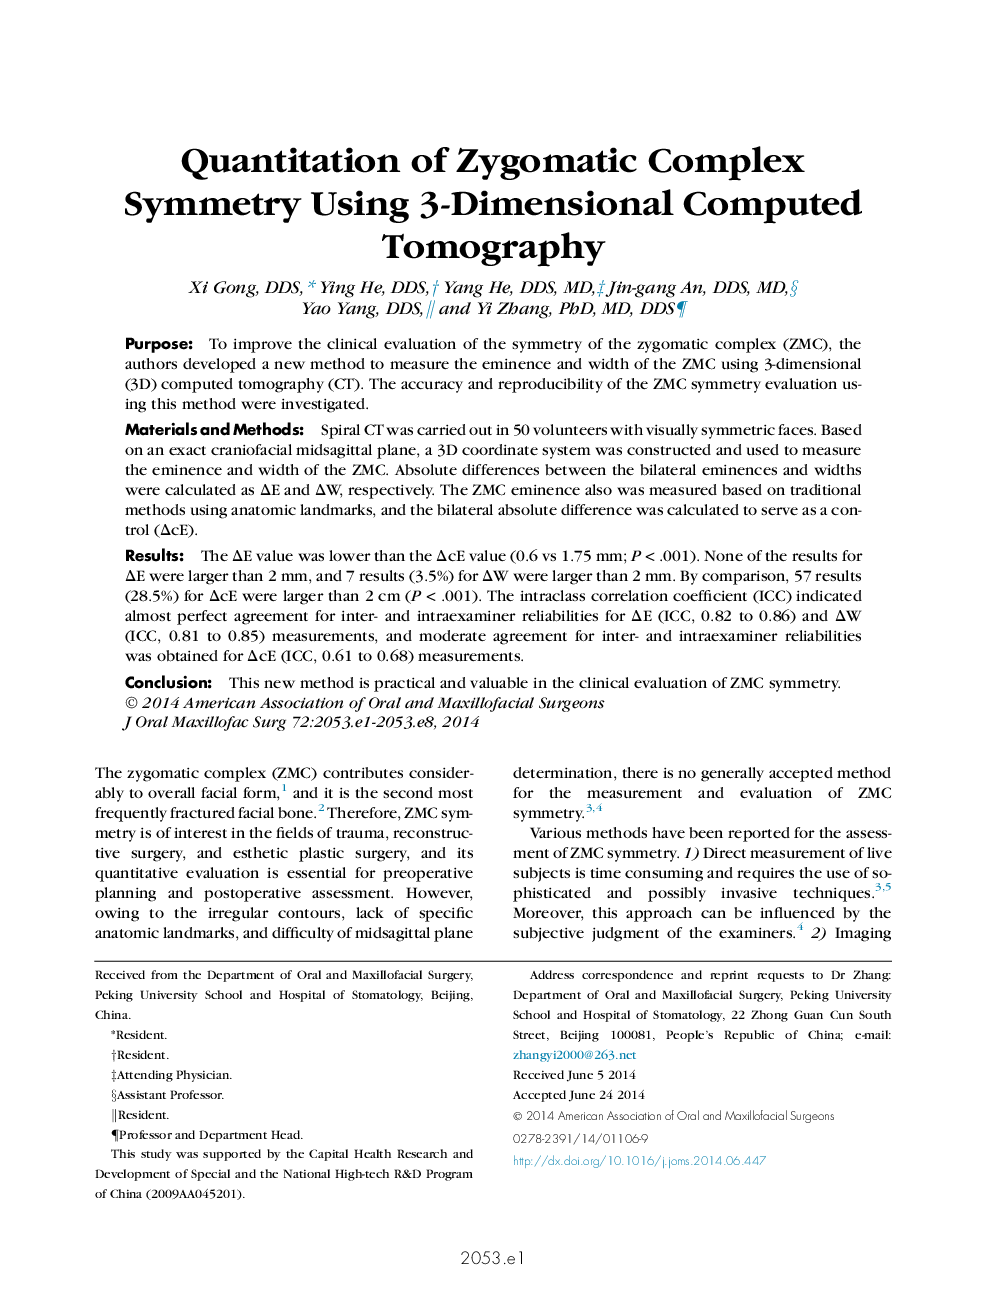 Quantitation of Zygomatic Complex Symmetry Using 3-Dimensional Computed Tomography